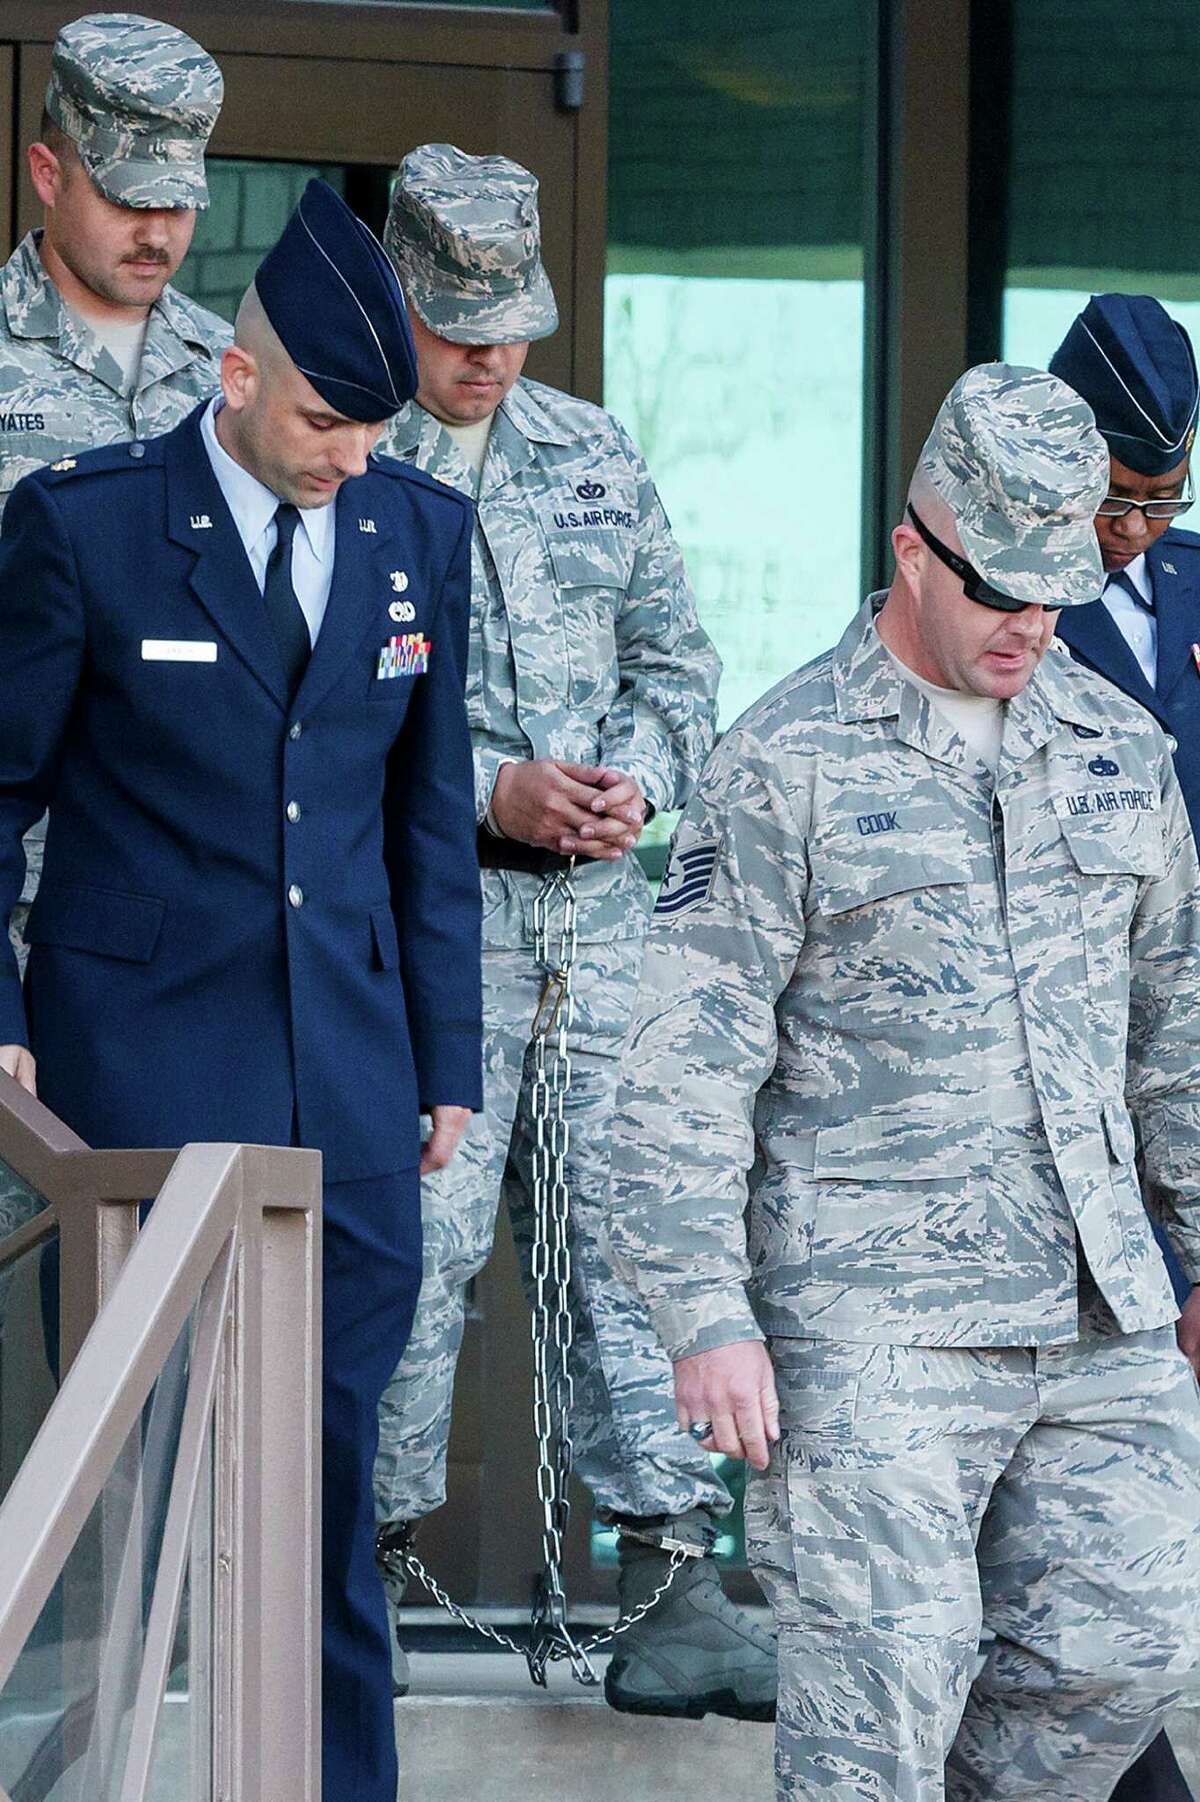 A shackled Staff Sgt. Eddy Soto (center) is escorted out of the 37th Training Wing headquarters building at Lackland after his Article 32 hearing on Saturday, March 16, 2013. Soto is the second basic training instructor to be found guilty of rape. He was also accused of having an "unprofessional relationship" with a female trainee and of sexually assaulting two female former trainees.